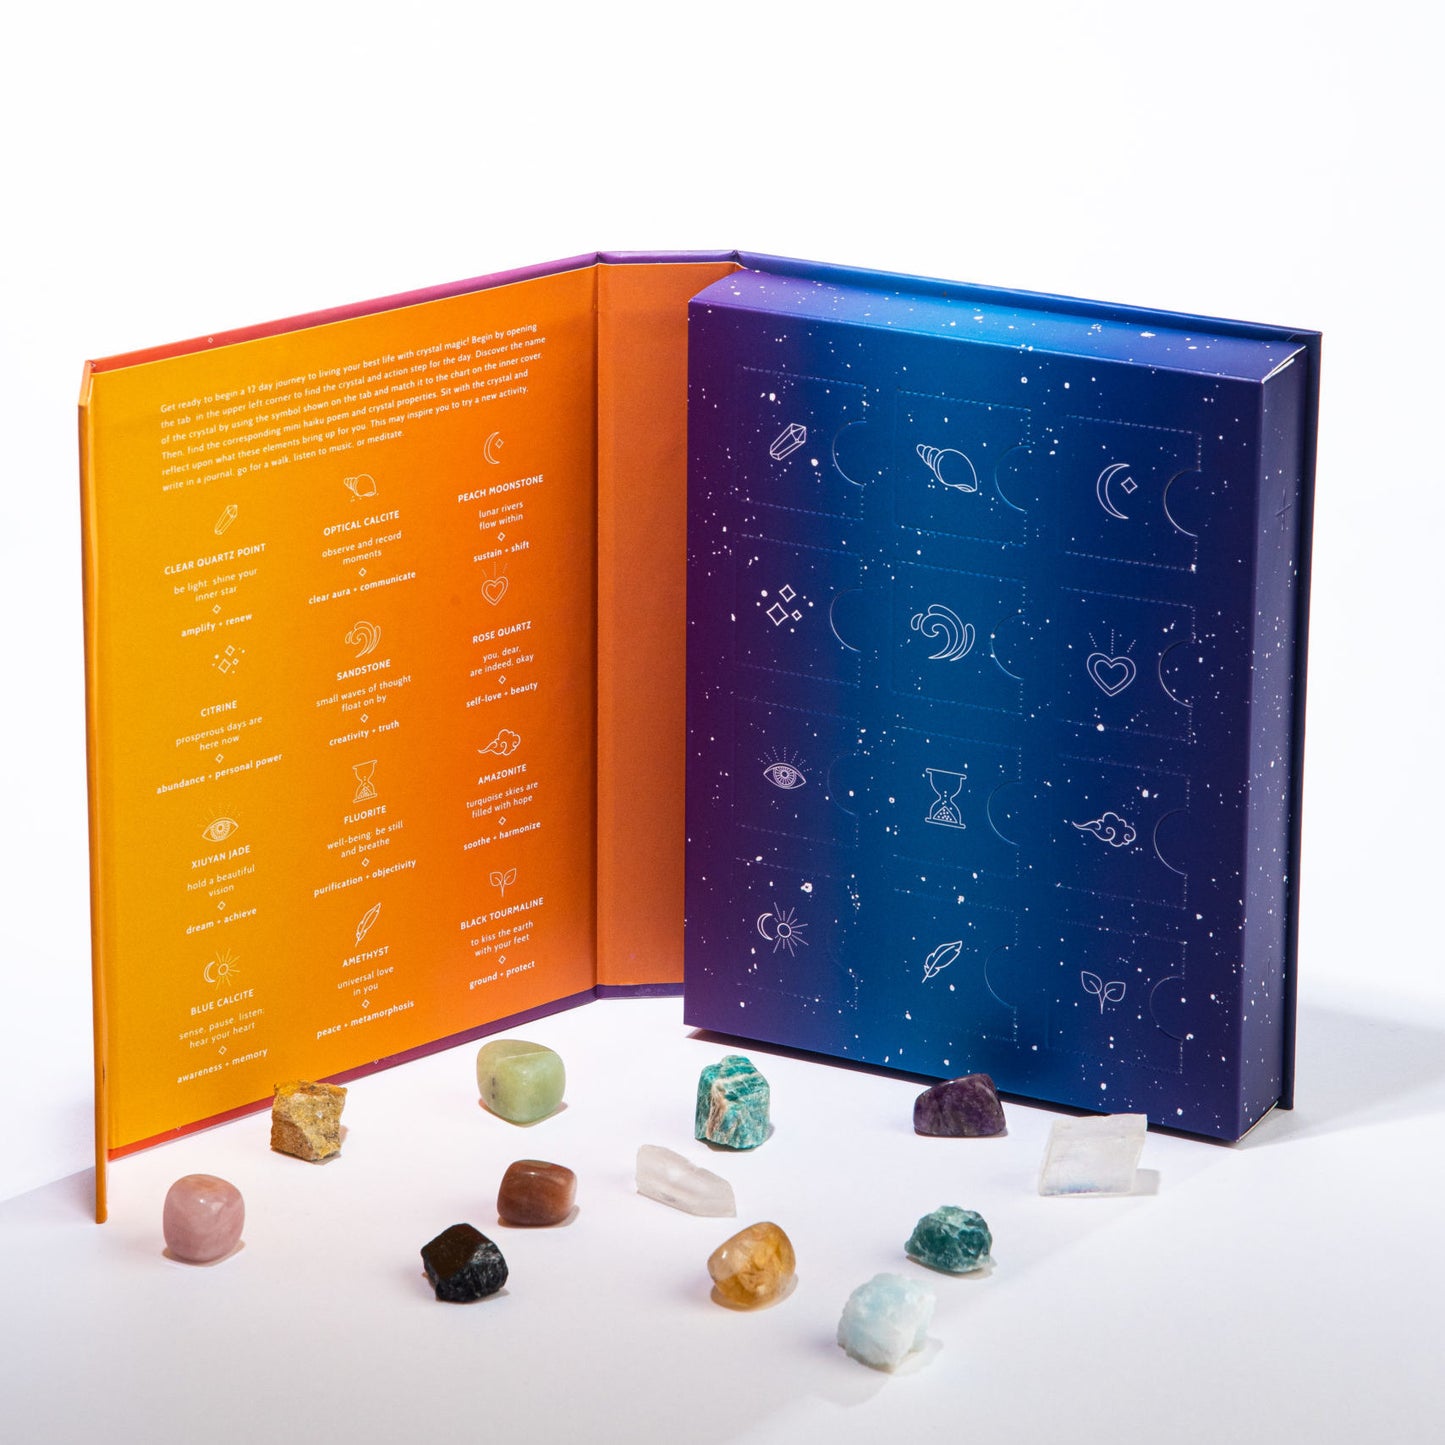 12 Day Self-Care Toolkit Healing Stones / Crystals